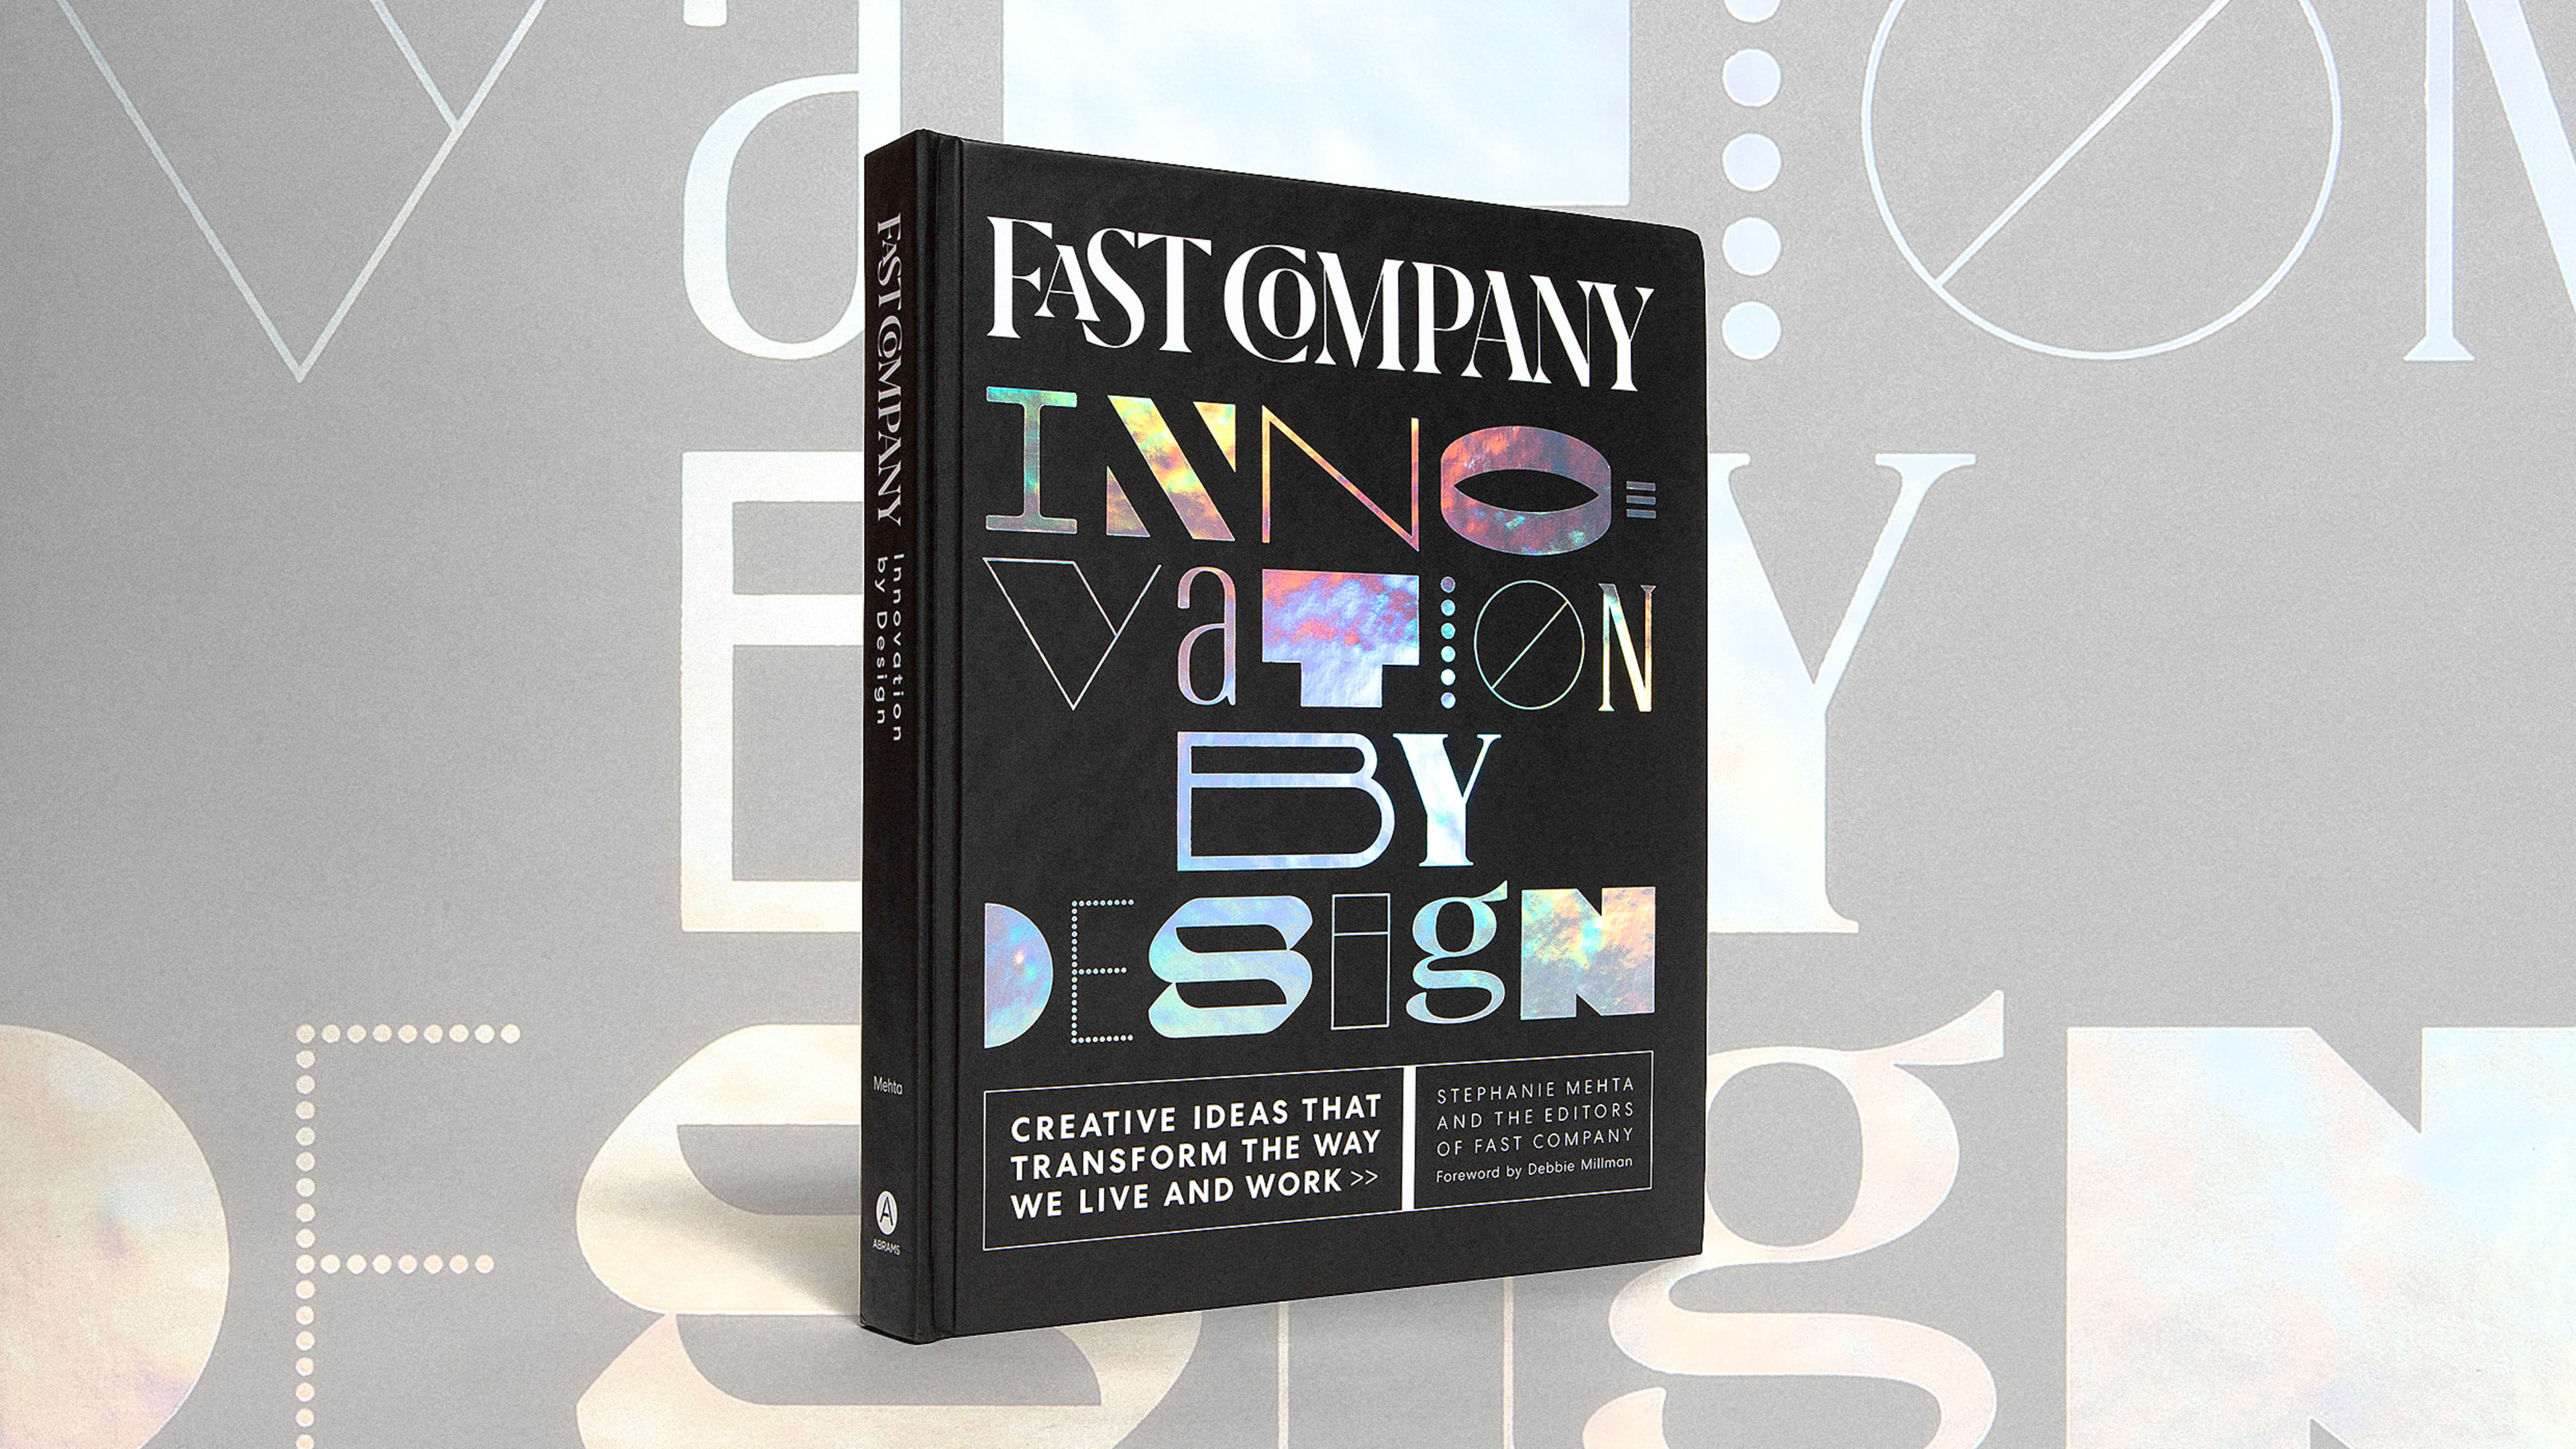 The most successful companies infuse their business with design. Now they need to think bigger